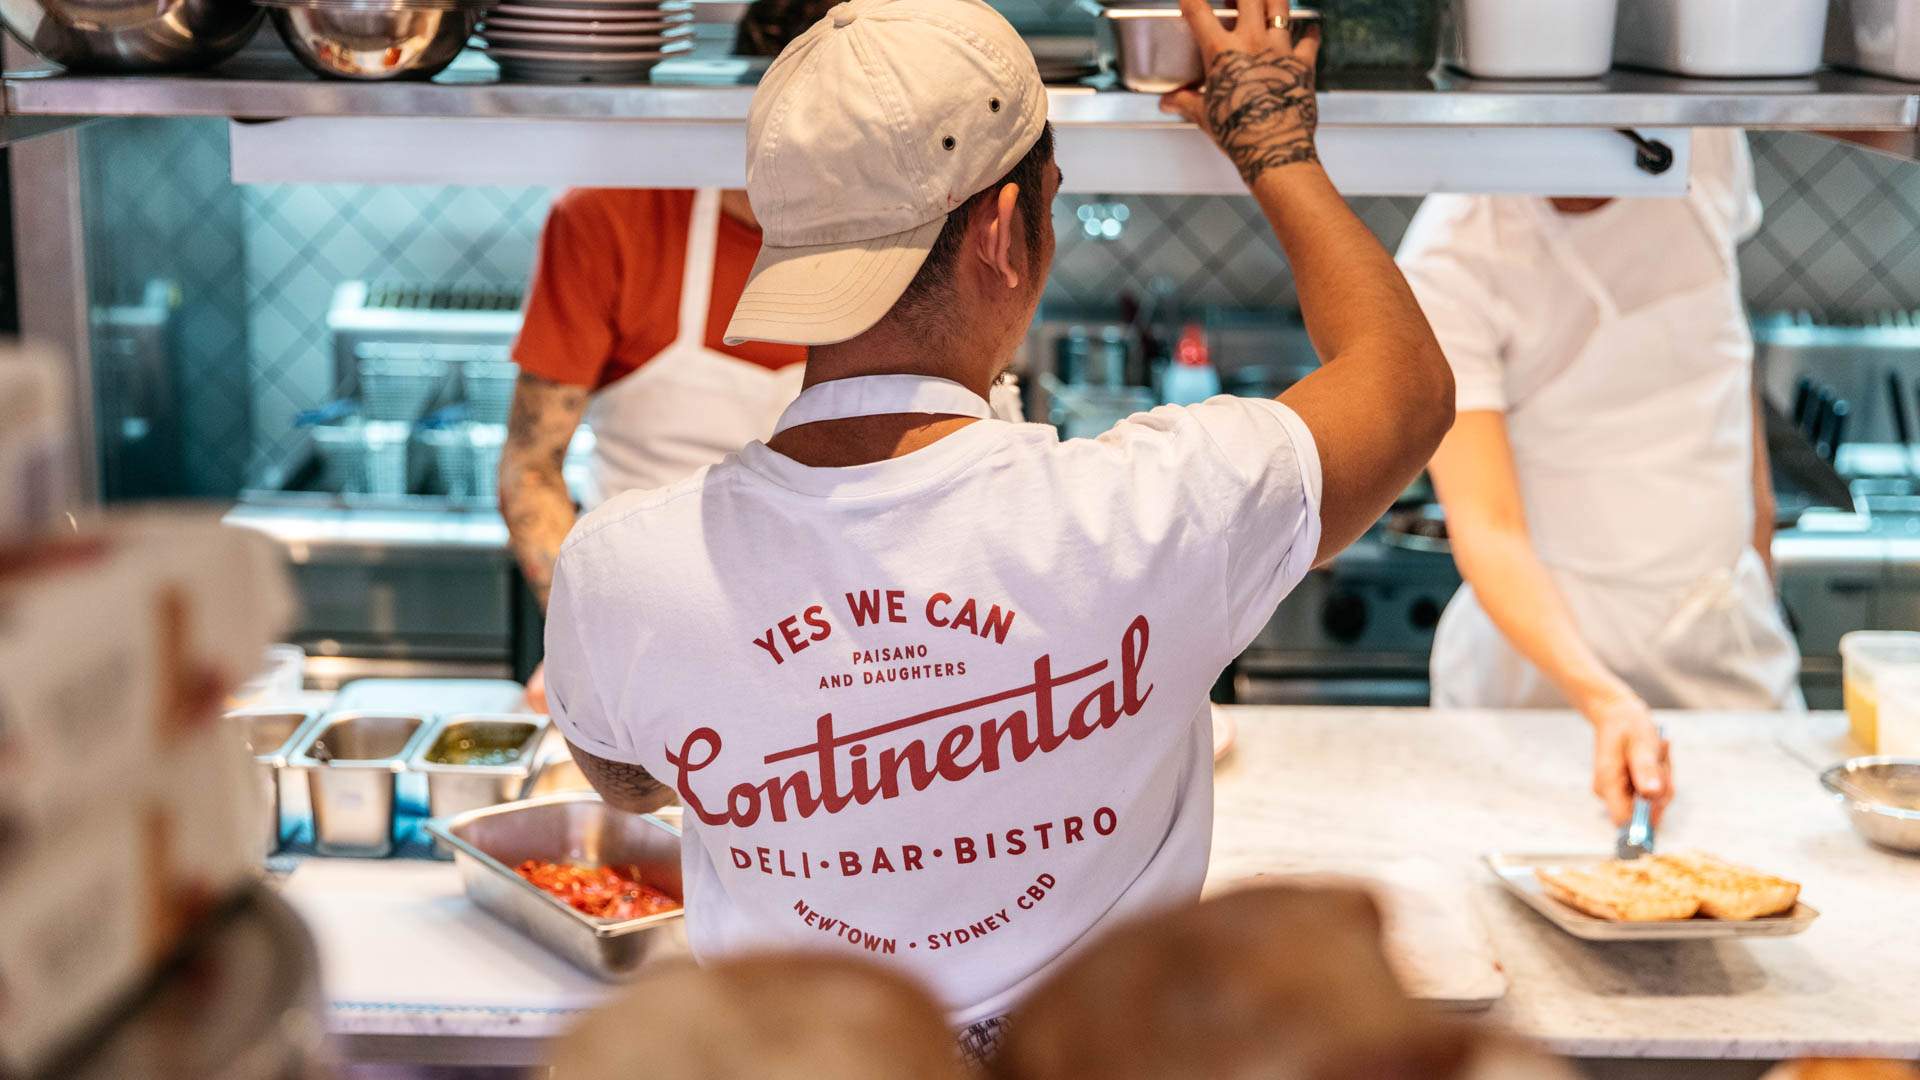 Continental Deli Has Opened a Second Shrine of Cocktails, Charcuterie and Canned Stuff in the CBD